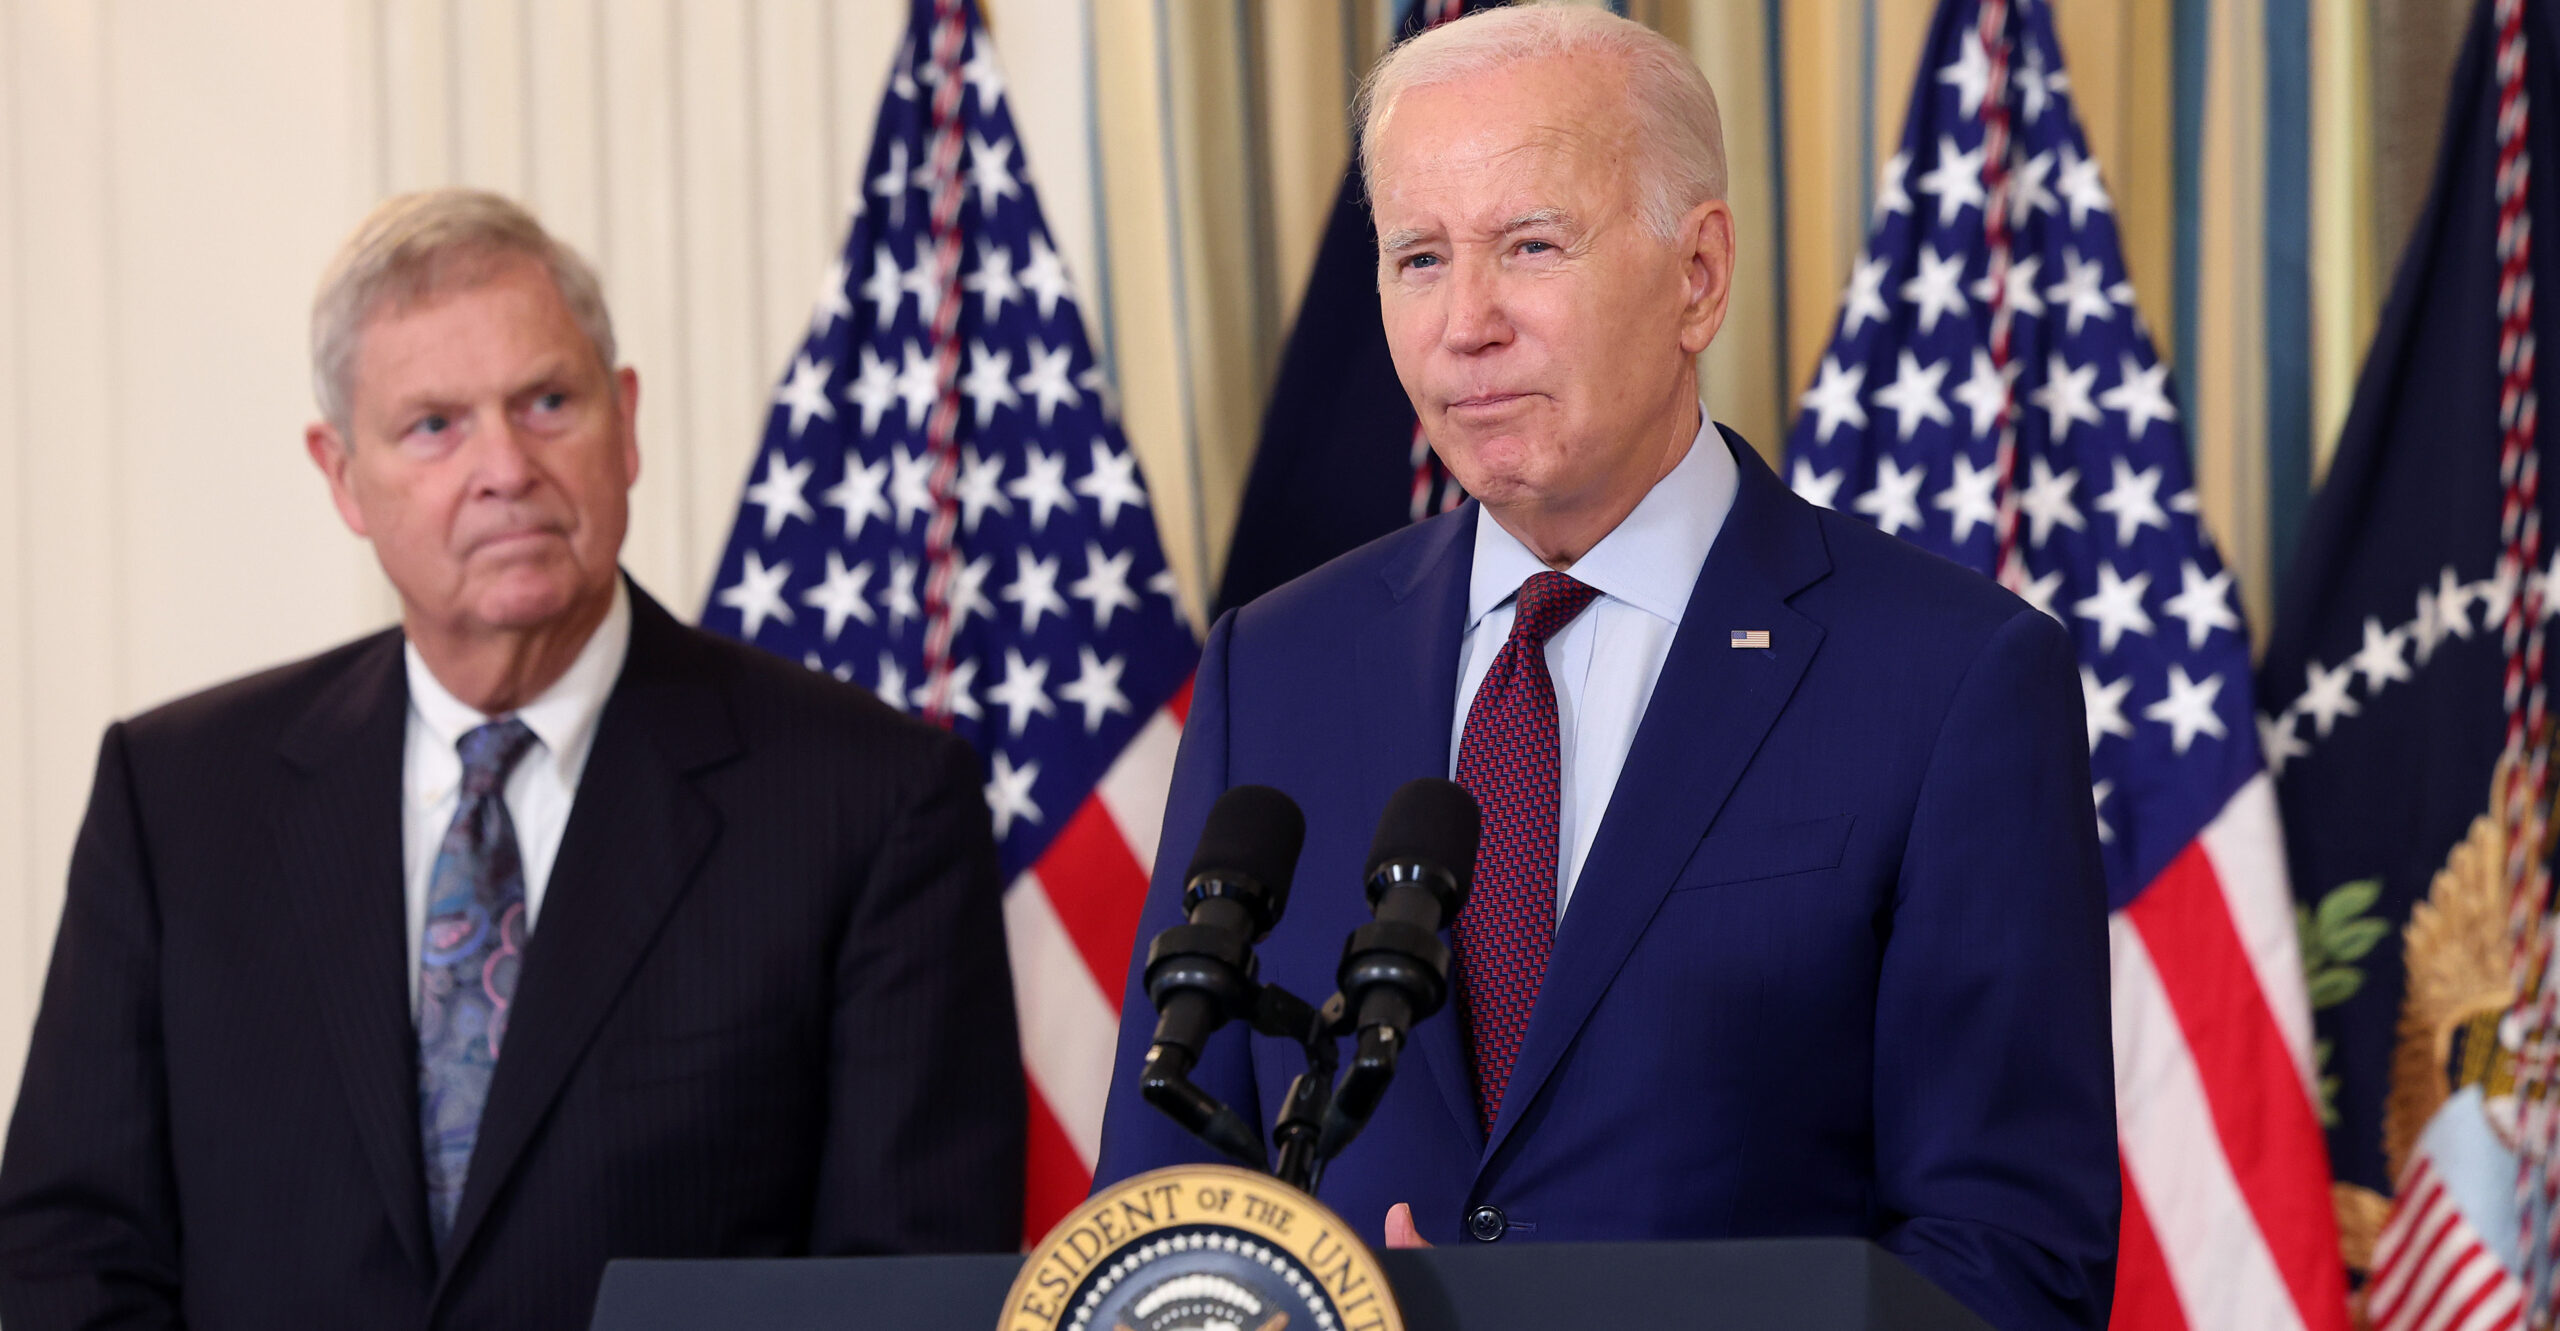 USDA Colludes With Left-Wing Group to Turn Out Voters Under Biden Order, Documents Reveal